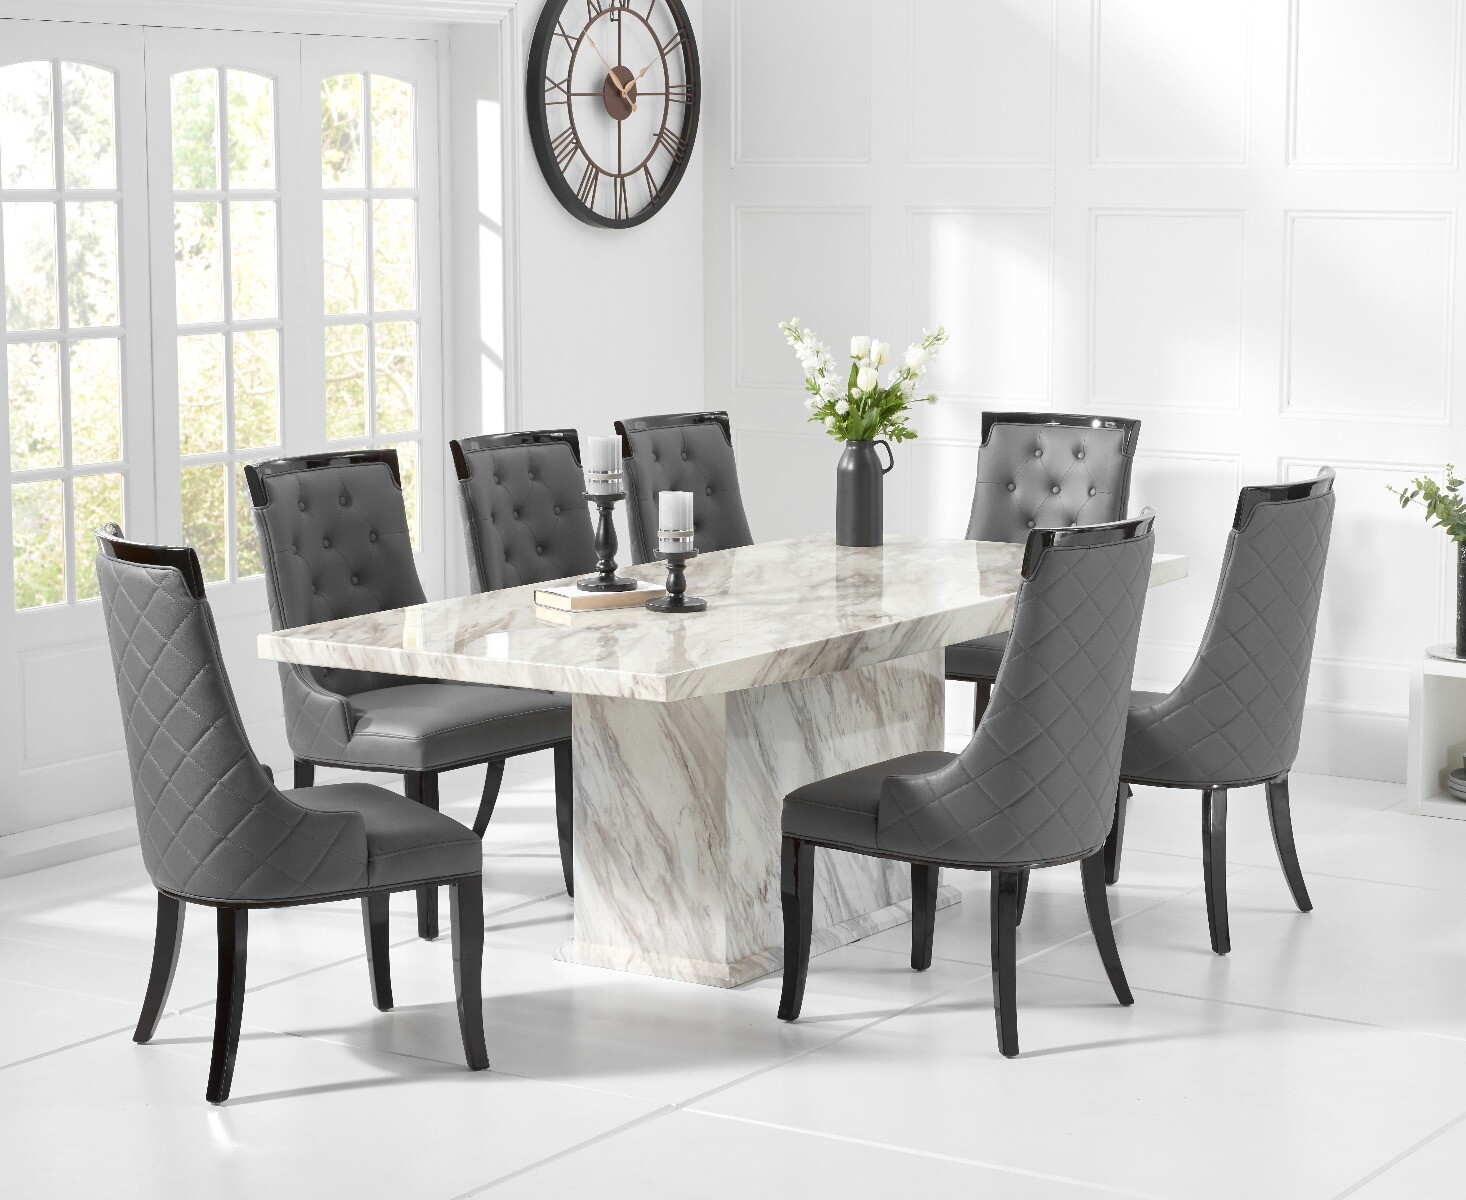 Calacatta 220cm Marbleeffect Dining Table With 10 Cream Francesca Chairs